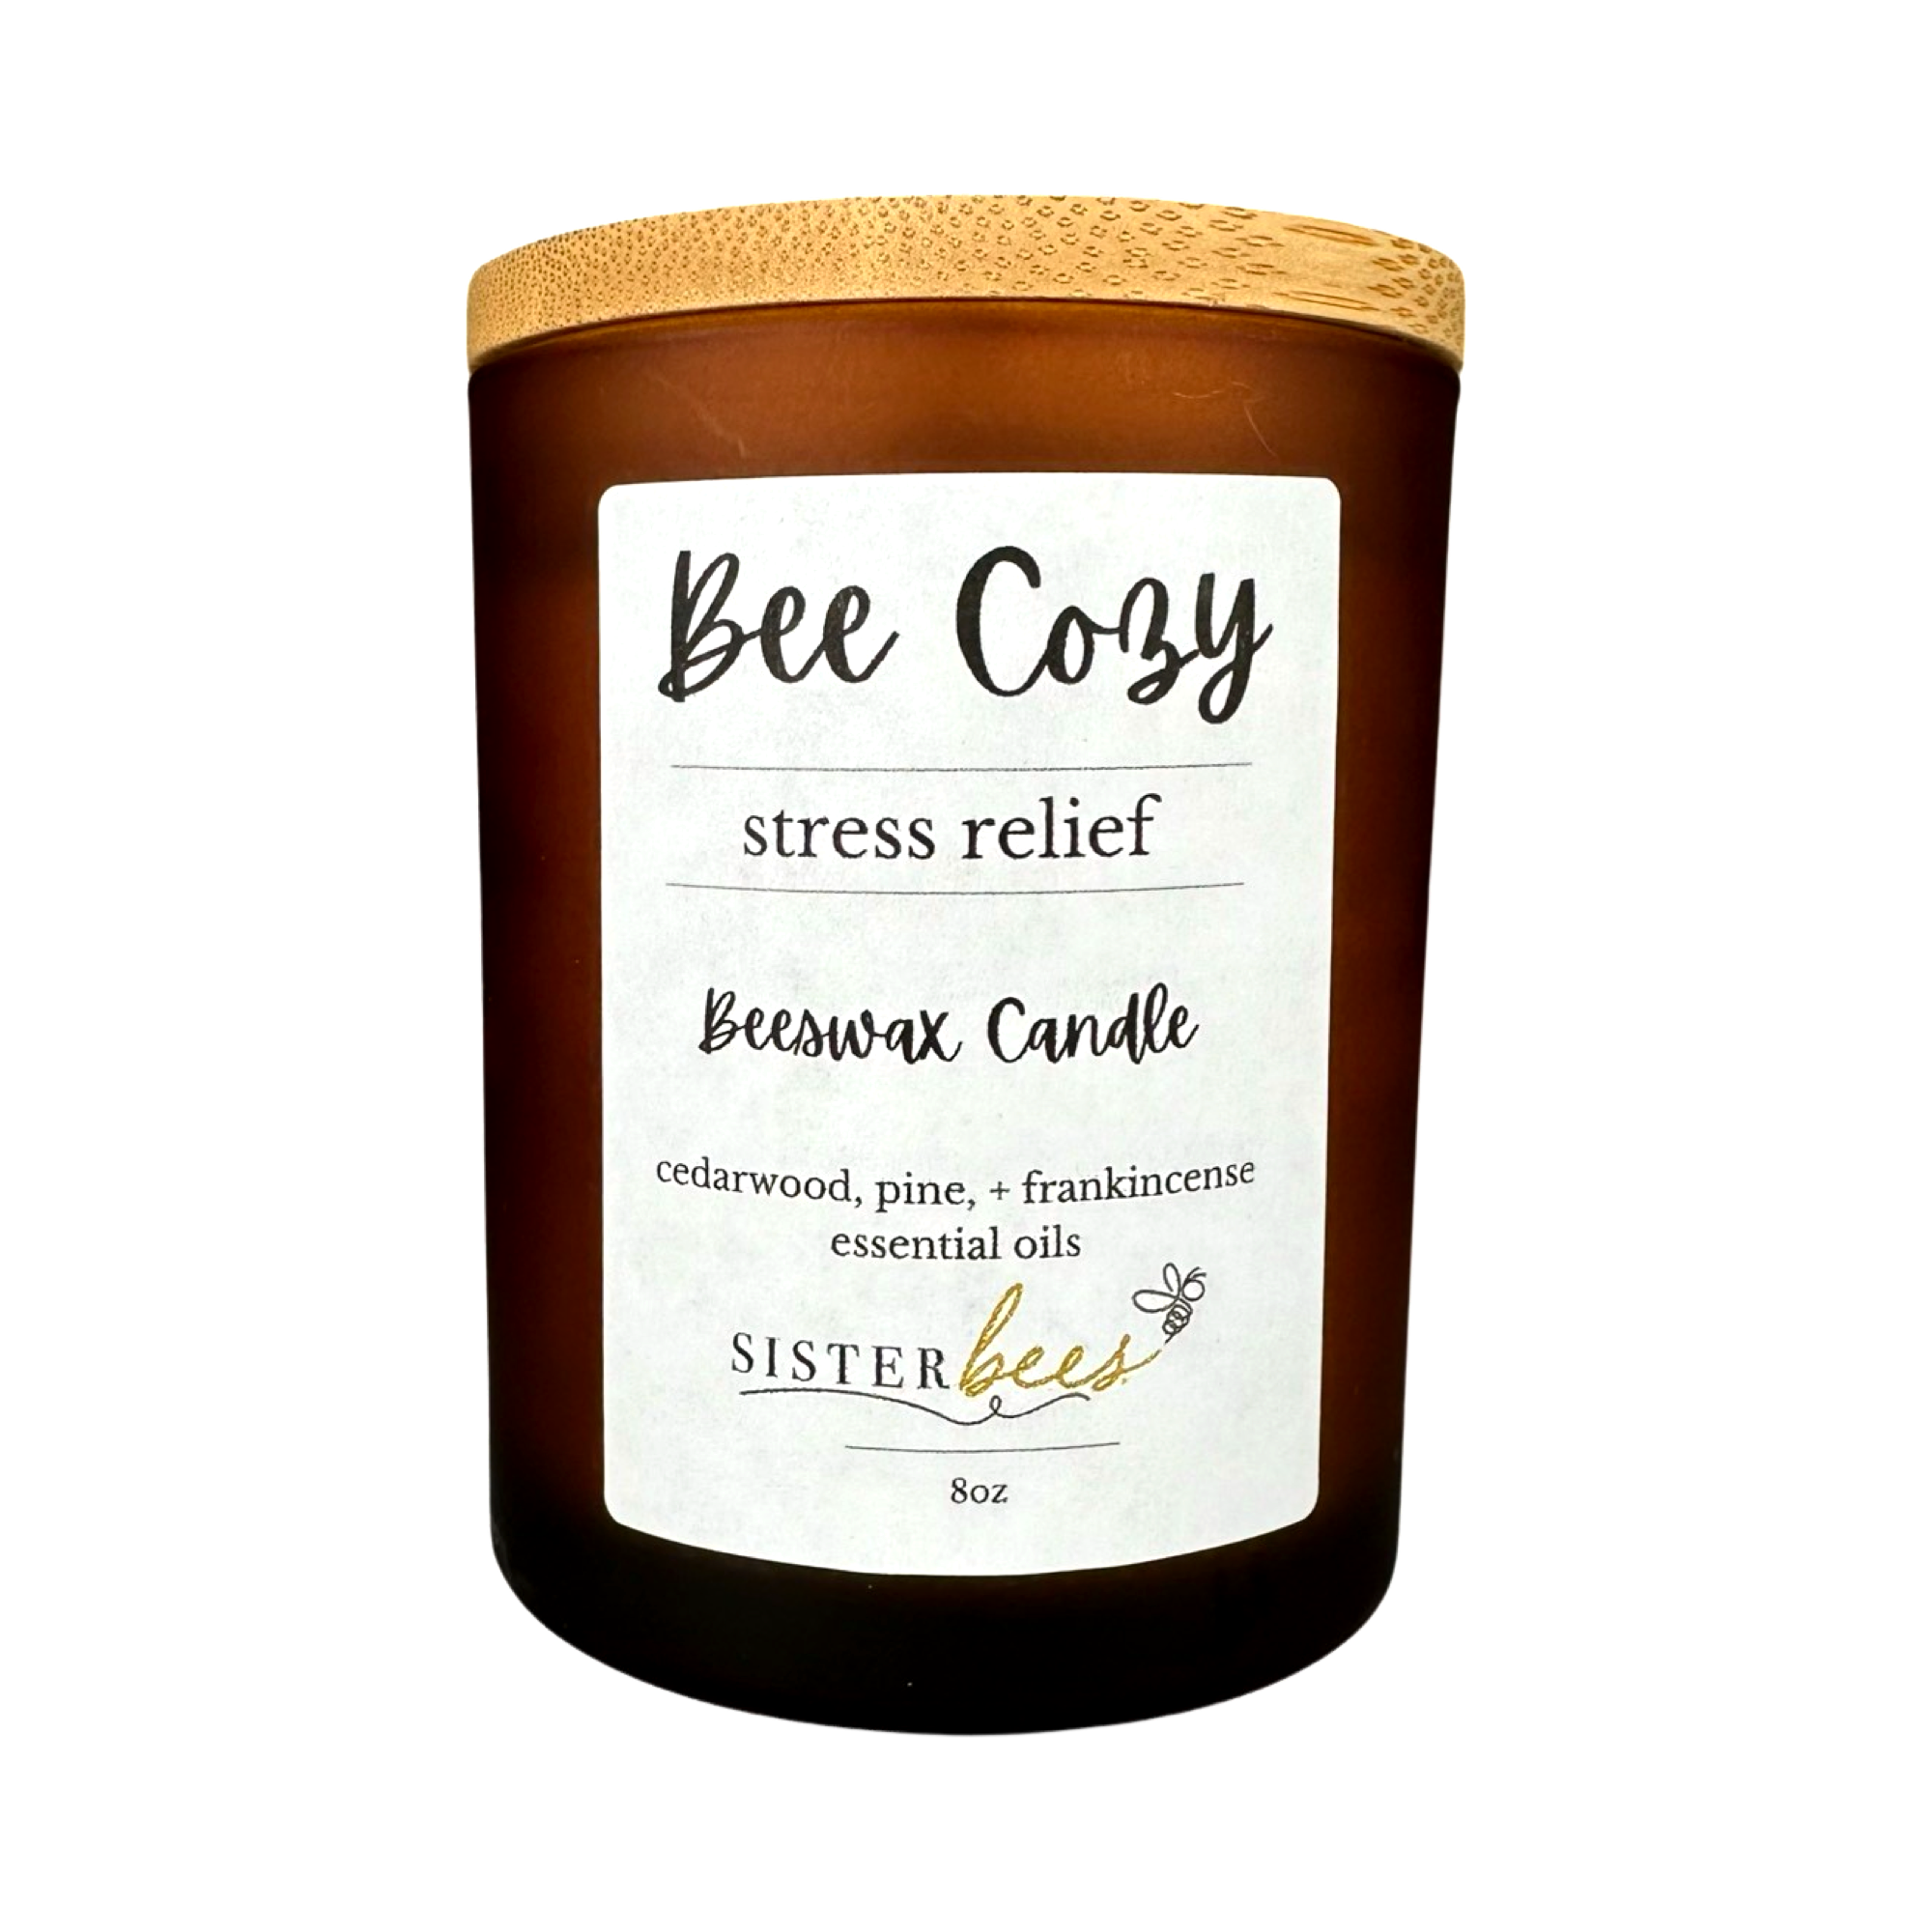 "Cozy Bee" Beeswax Candle - Stress Relief -Glass + Bamboo